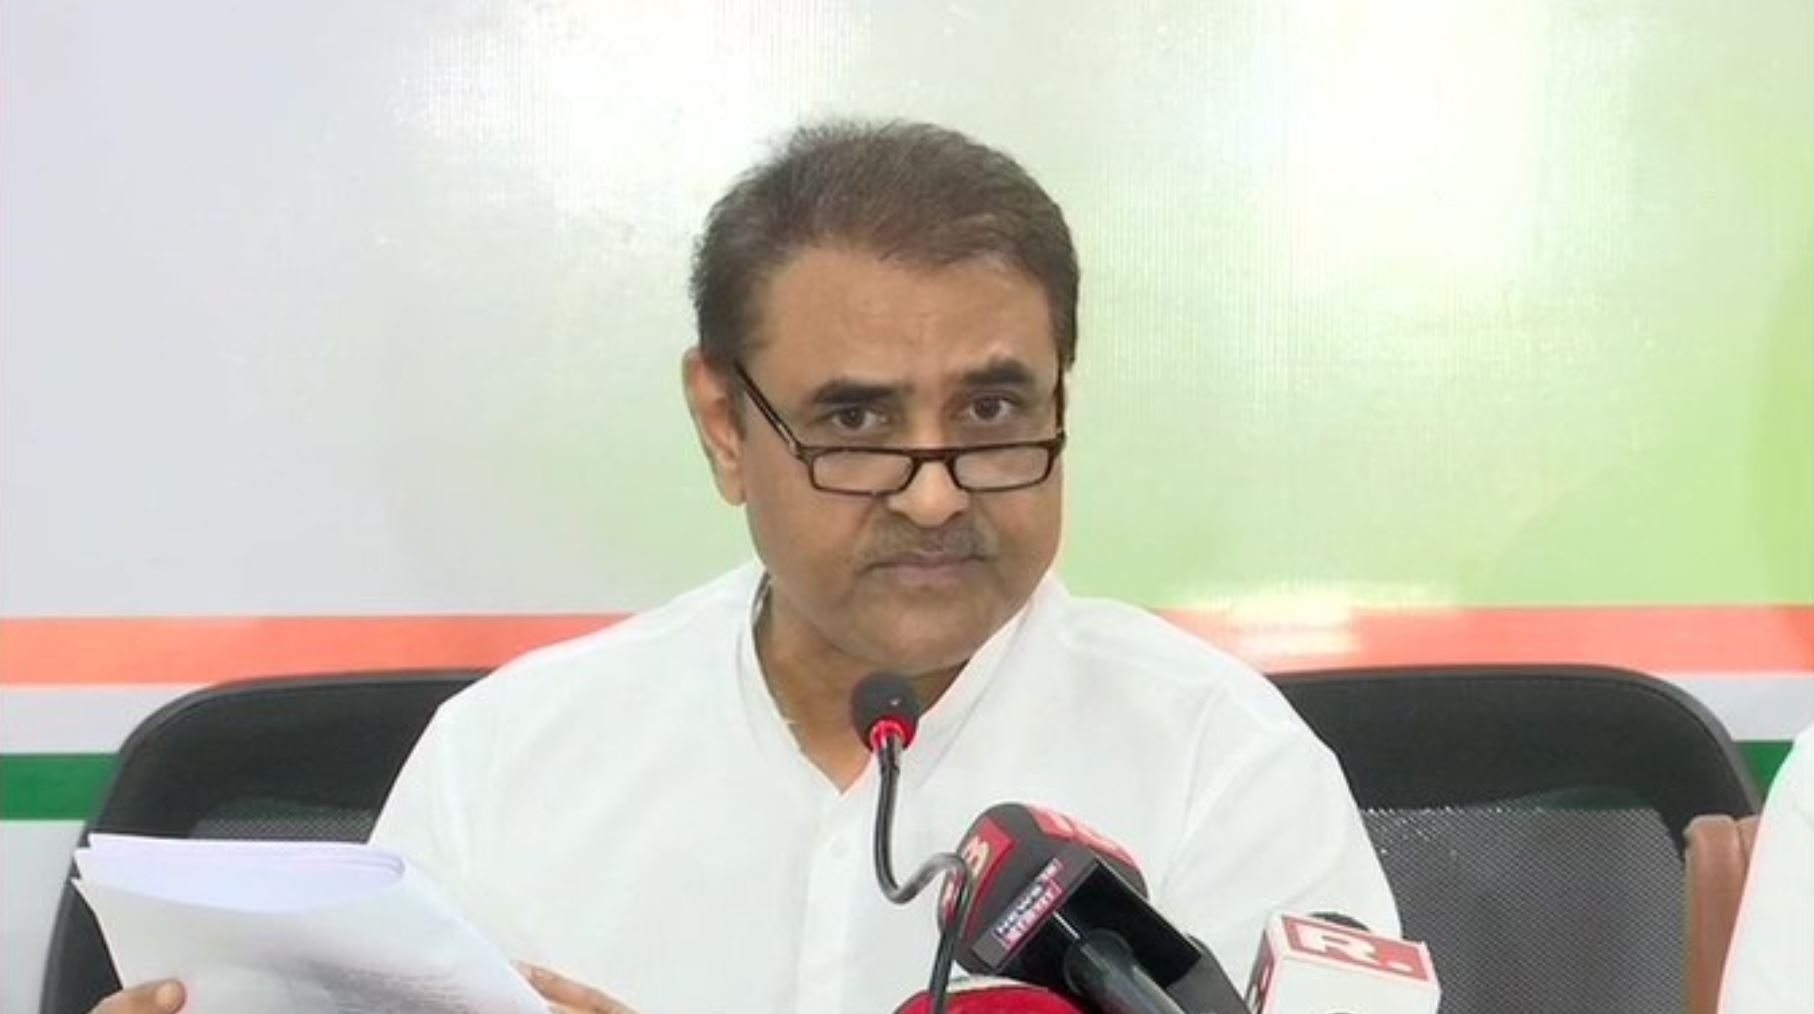 Never had any deal with Dawood aide Iqbal Mirchi, says Praful Patel